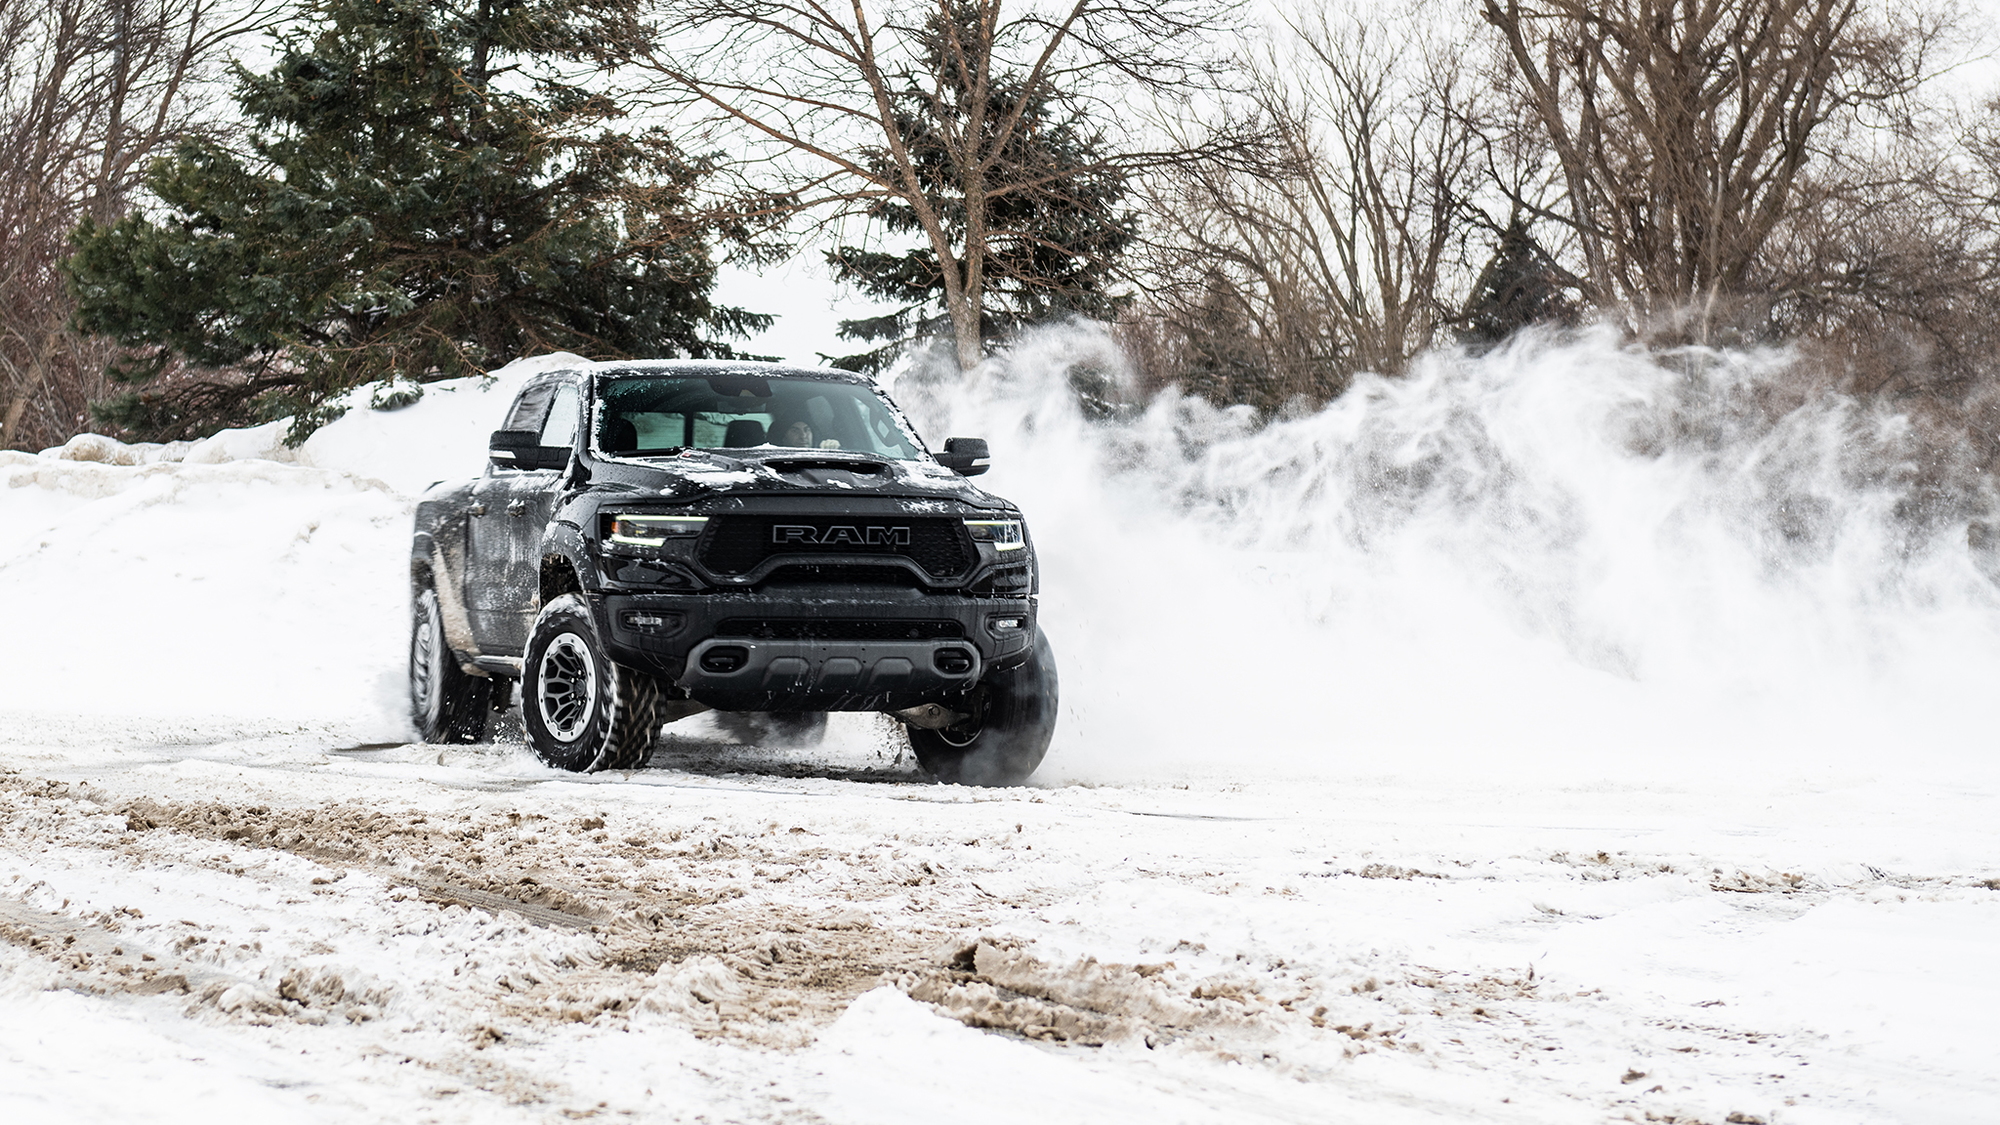 2021 Ram 1500 TRX I Photography by Allex Bellus Photography